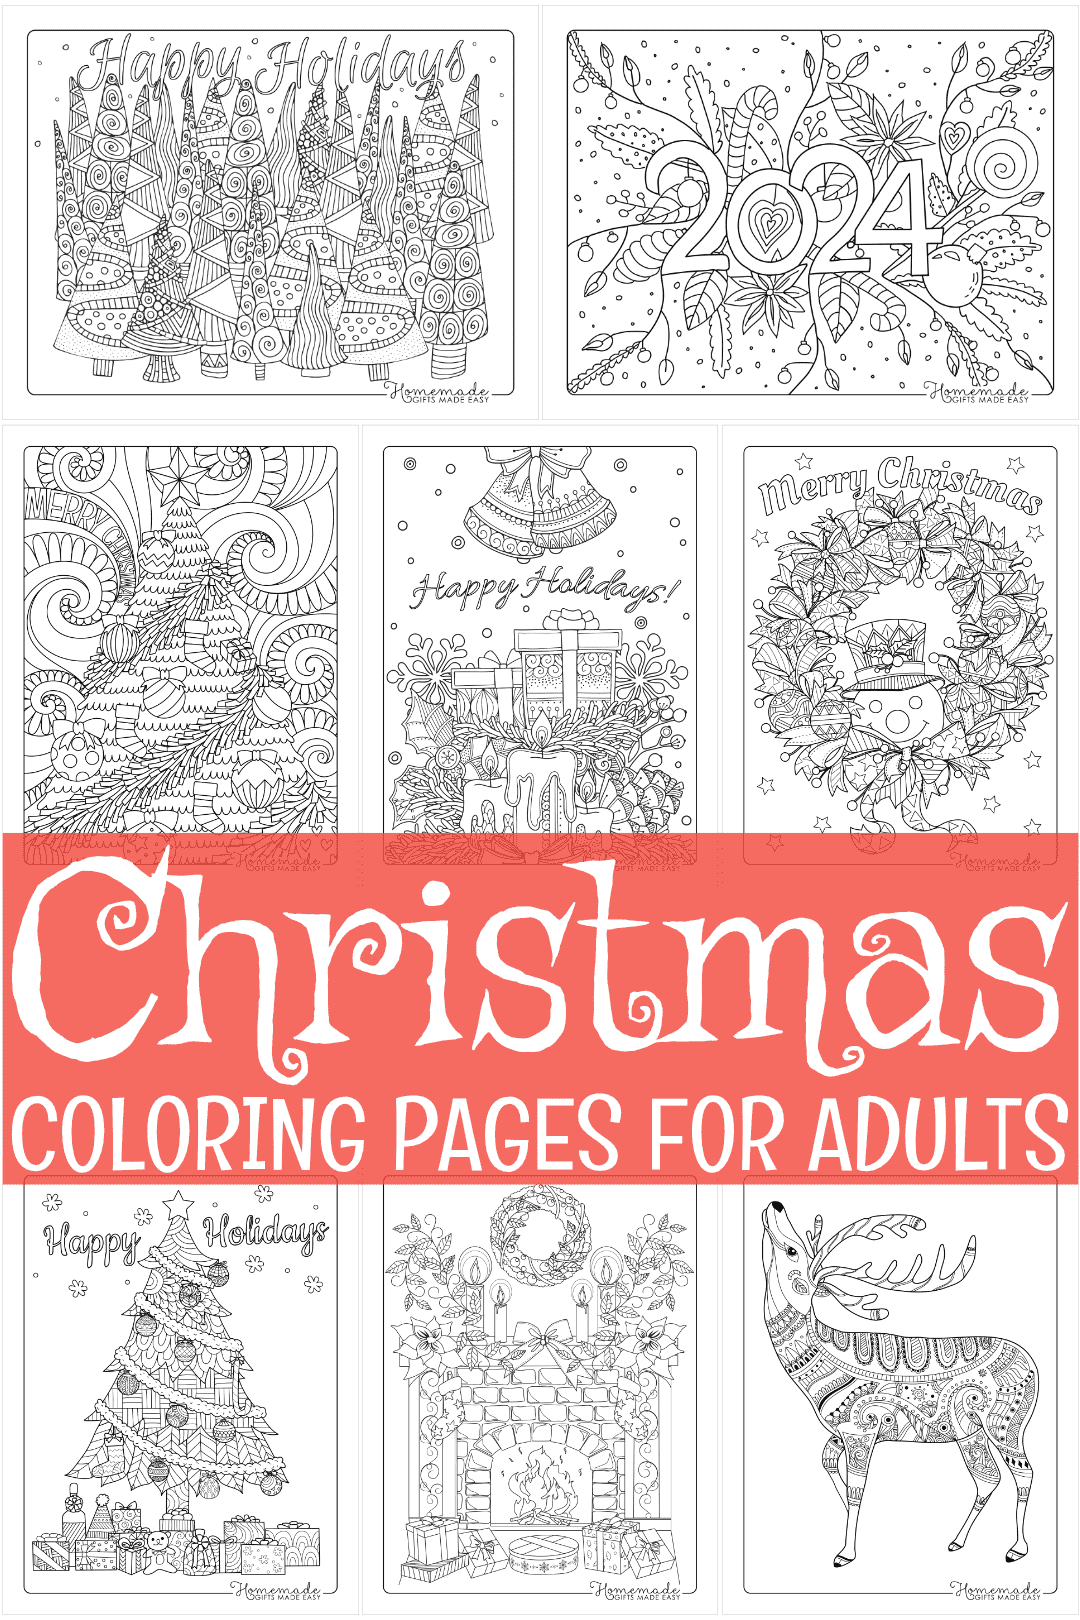 handmade-gifts-made-easy-coloring-pages-image-to-u